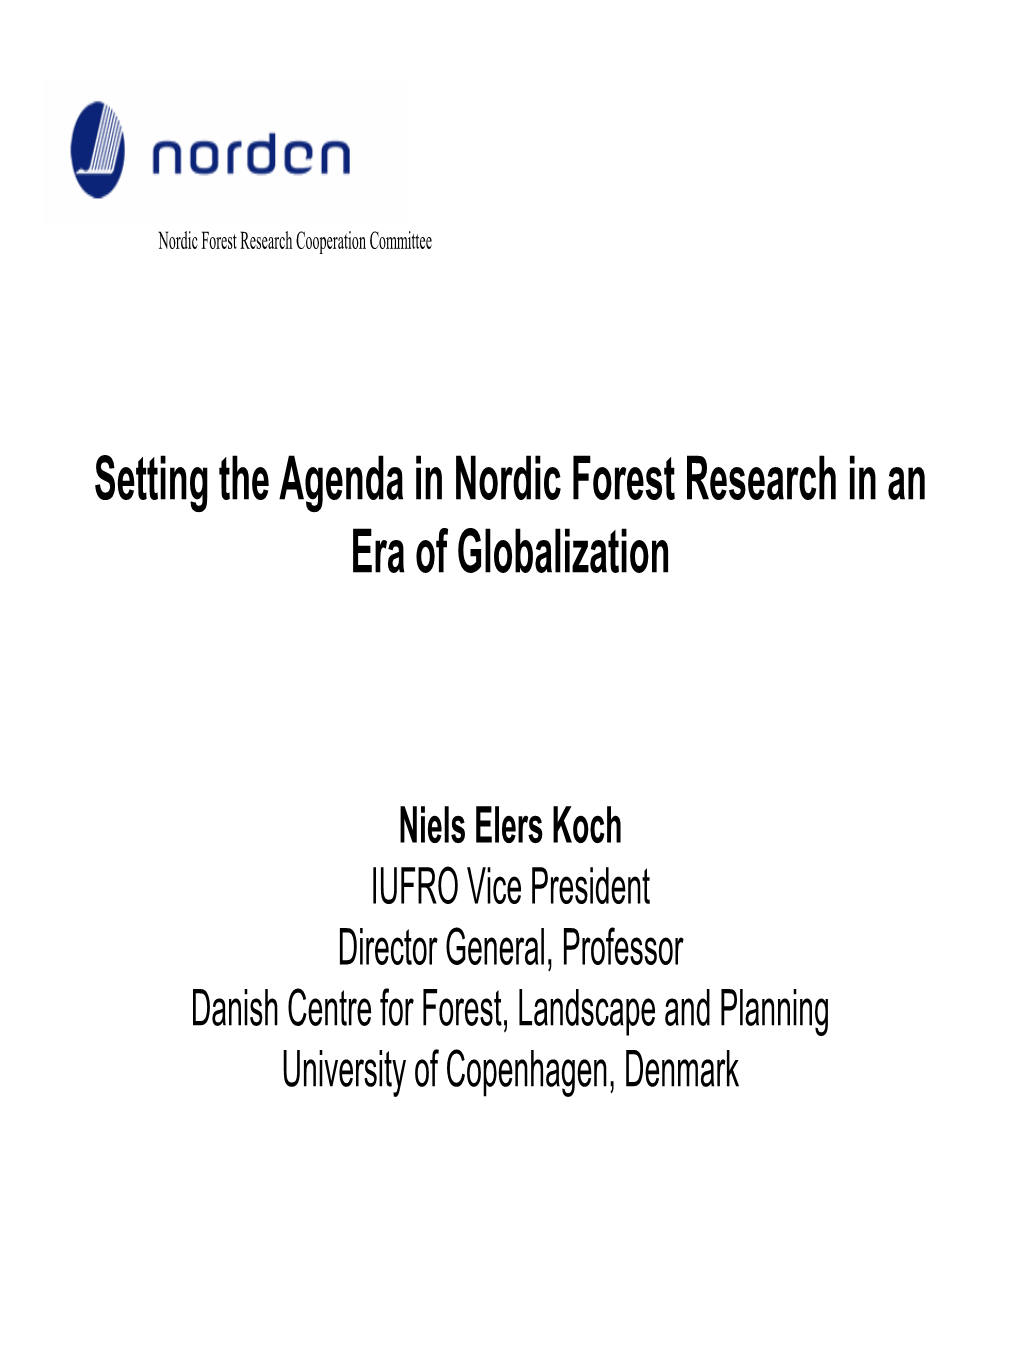 Setting the Agenda in Nordic Forest Research in an Era of Globalization